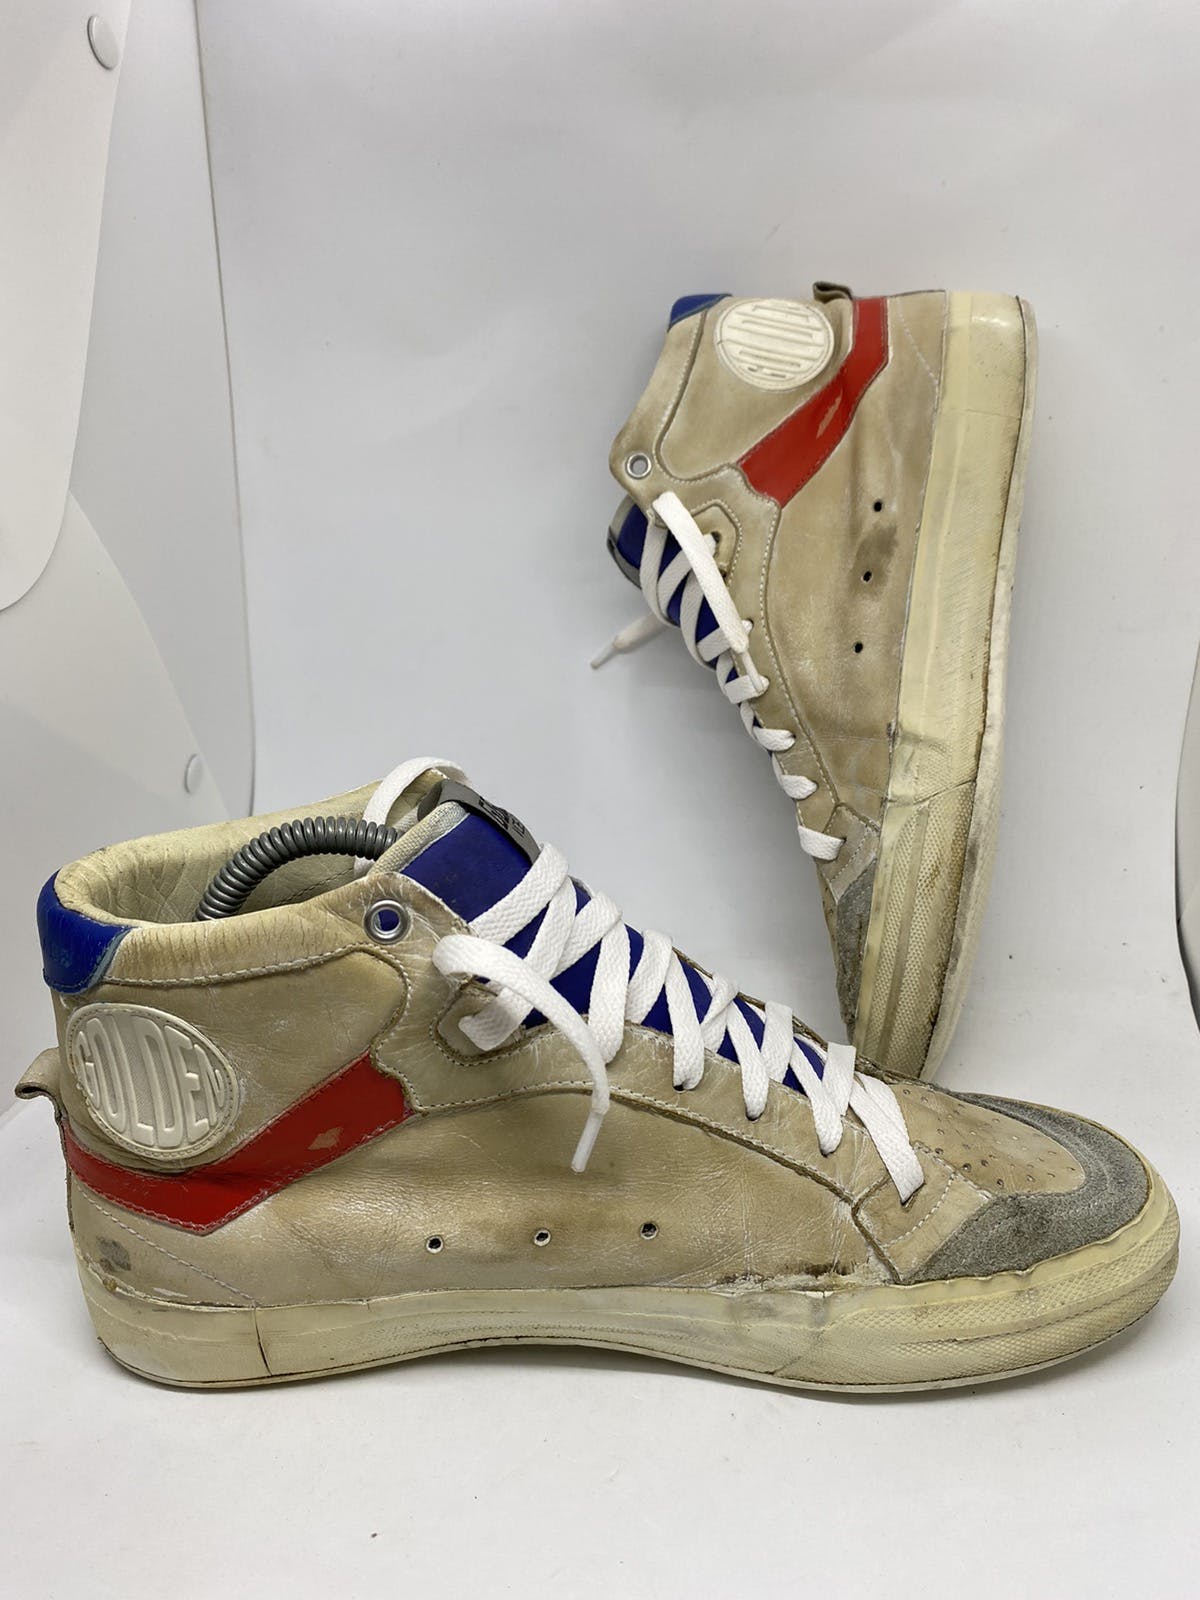 GOLDEN GOOSE vce 2.12 ggdb Sneakers size 41 or us 11 - 8